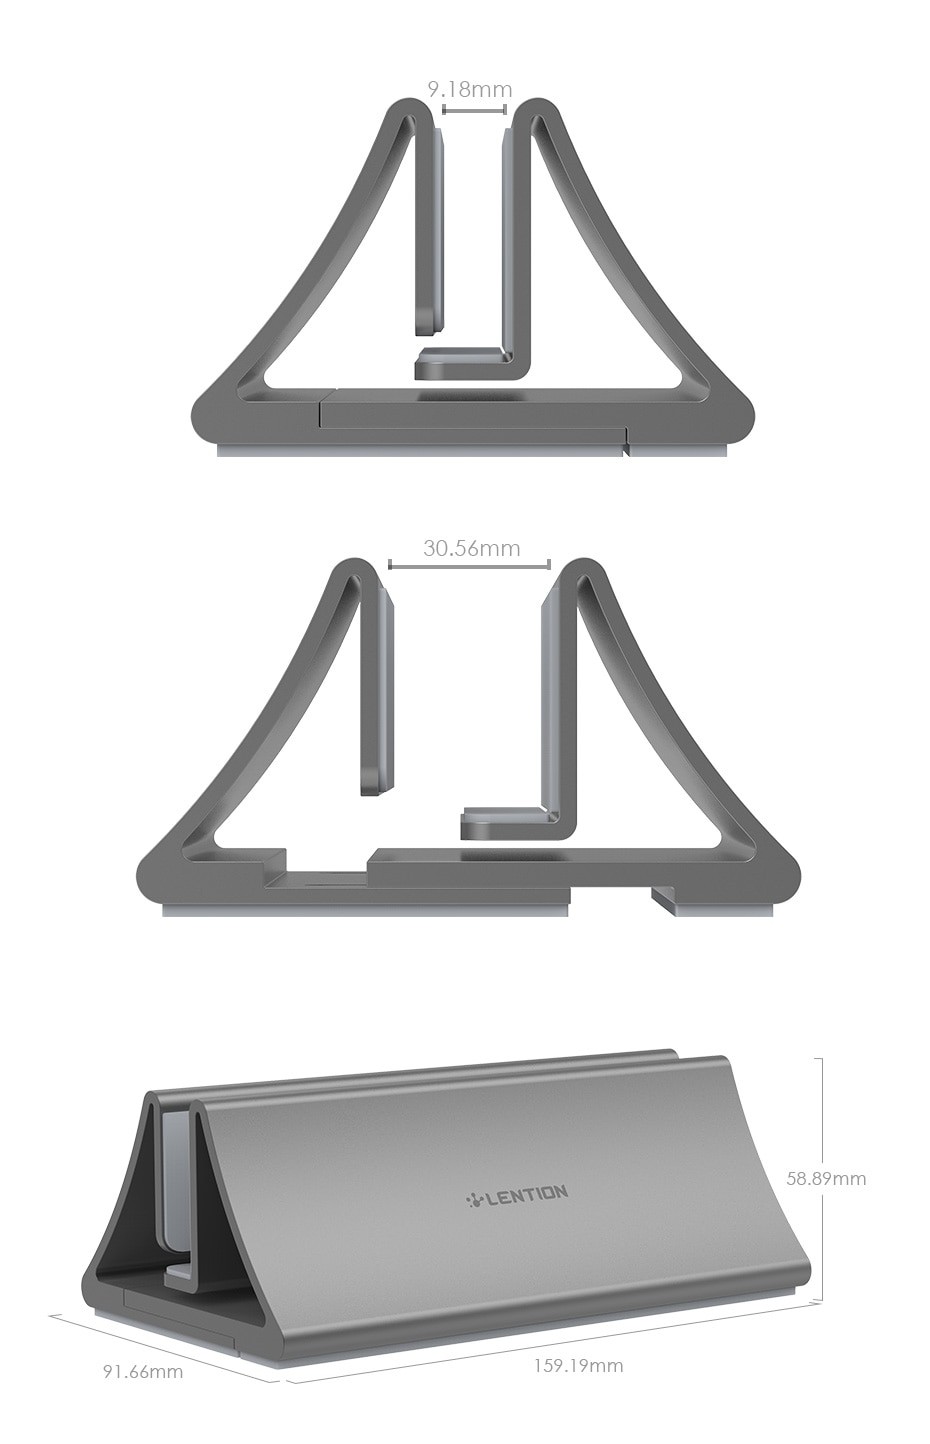 Aluminum Space-Saving Vertical Desktop Stand for MacBook Air/Pro 16 13 15, iPad Pro 12.9, Chromebook and 11 to 17-inch Laptop